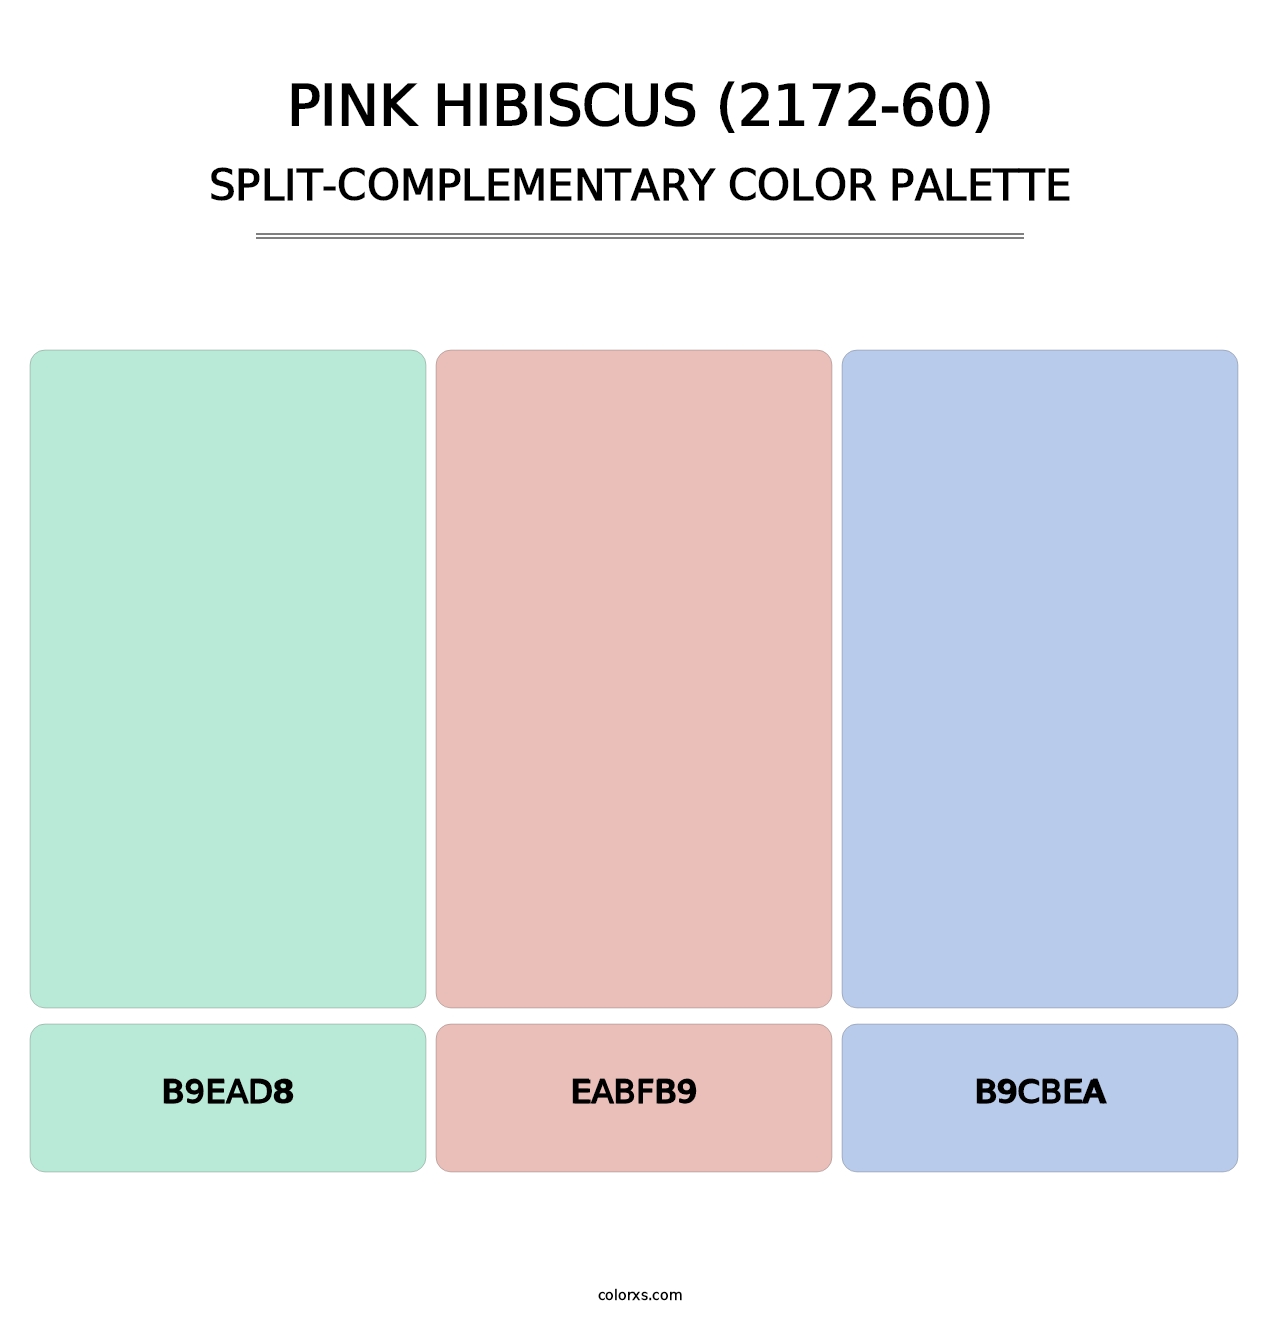 Pink Hibiscus (2172-60) - Split-Complementary Color Palette